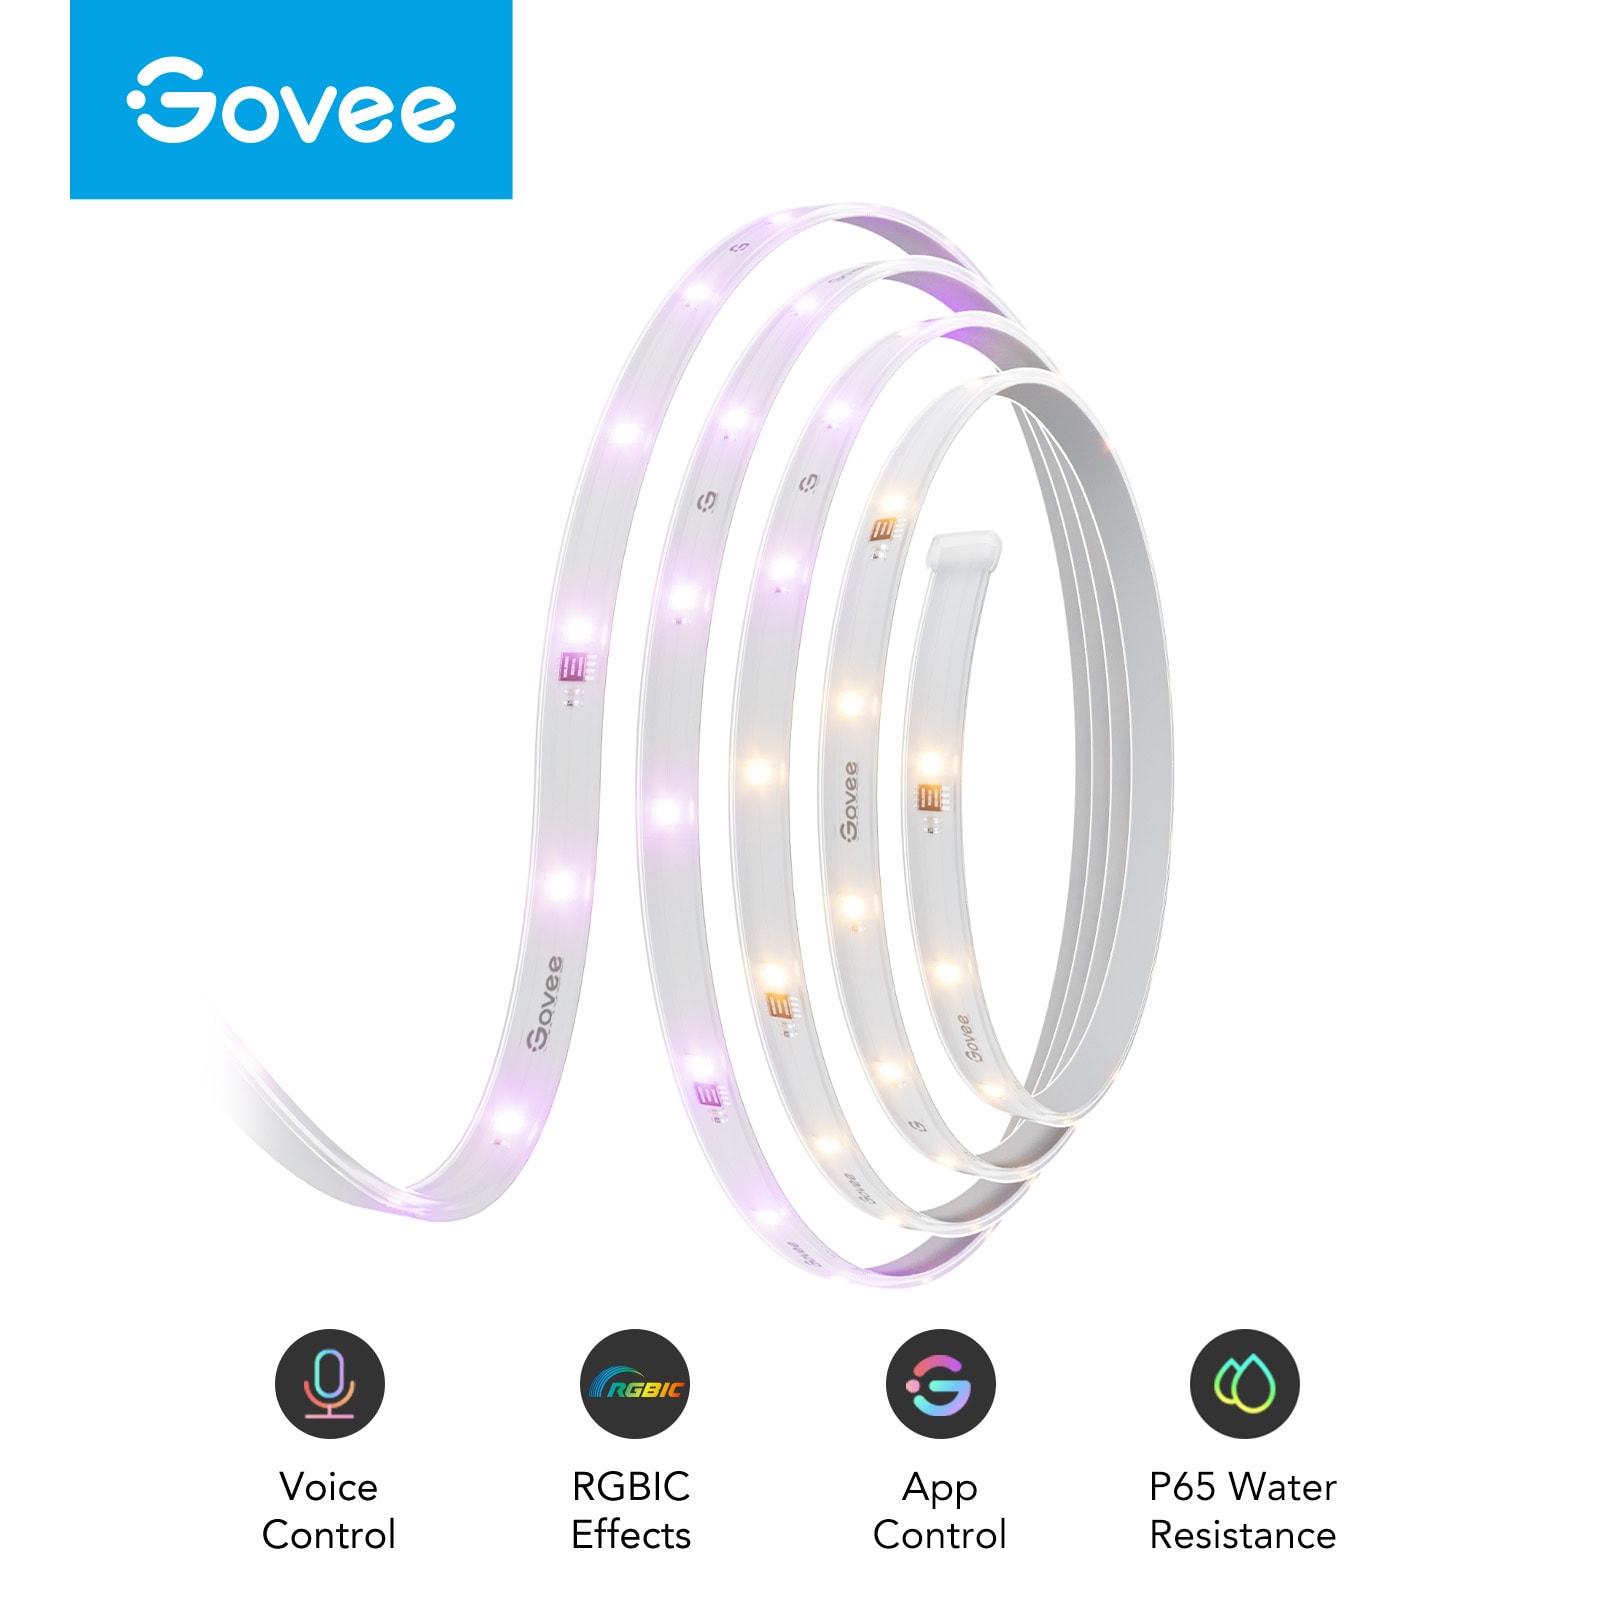 Govee RGBIC Outdoor LED Strip Lights, IP65 Water-Resistant 32.8ft Light  Strip with App Control, 64 Scene Modes, Music Mode for Outdoors, Home